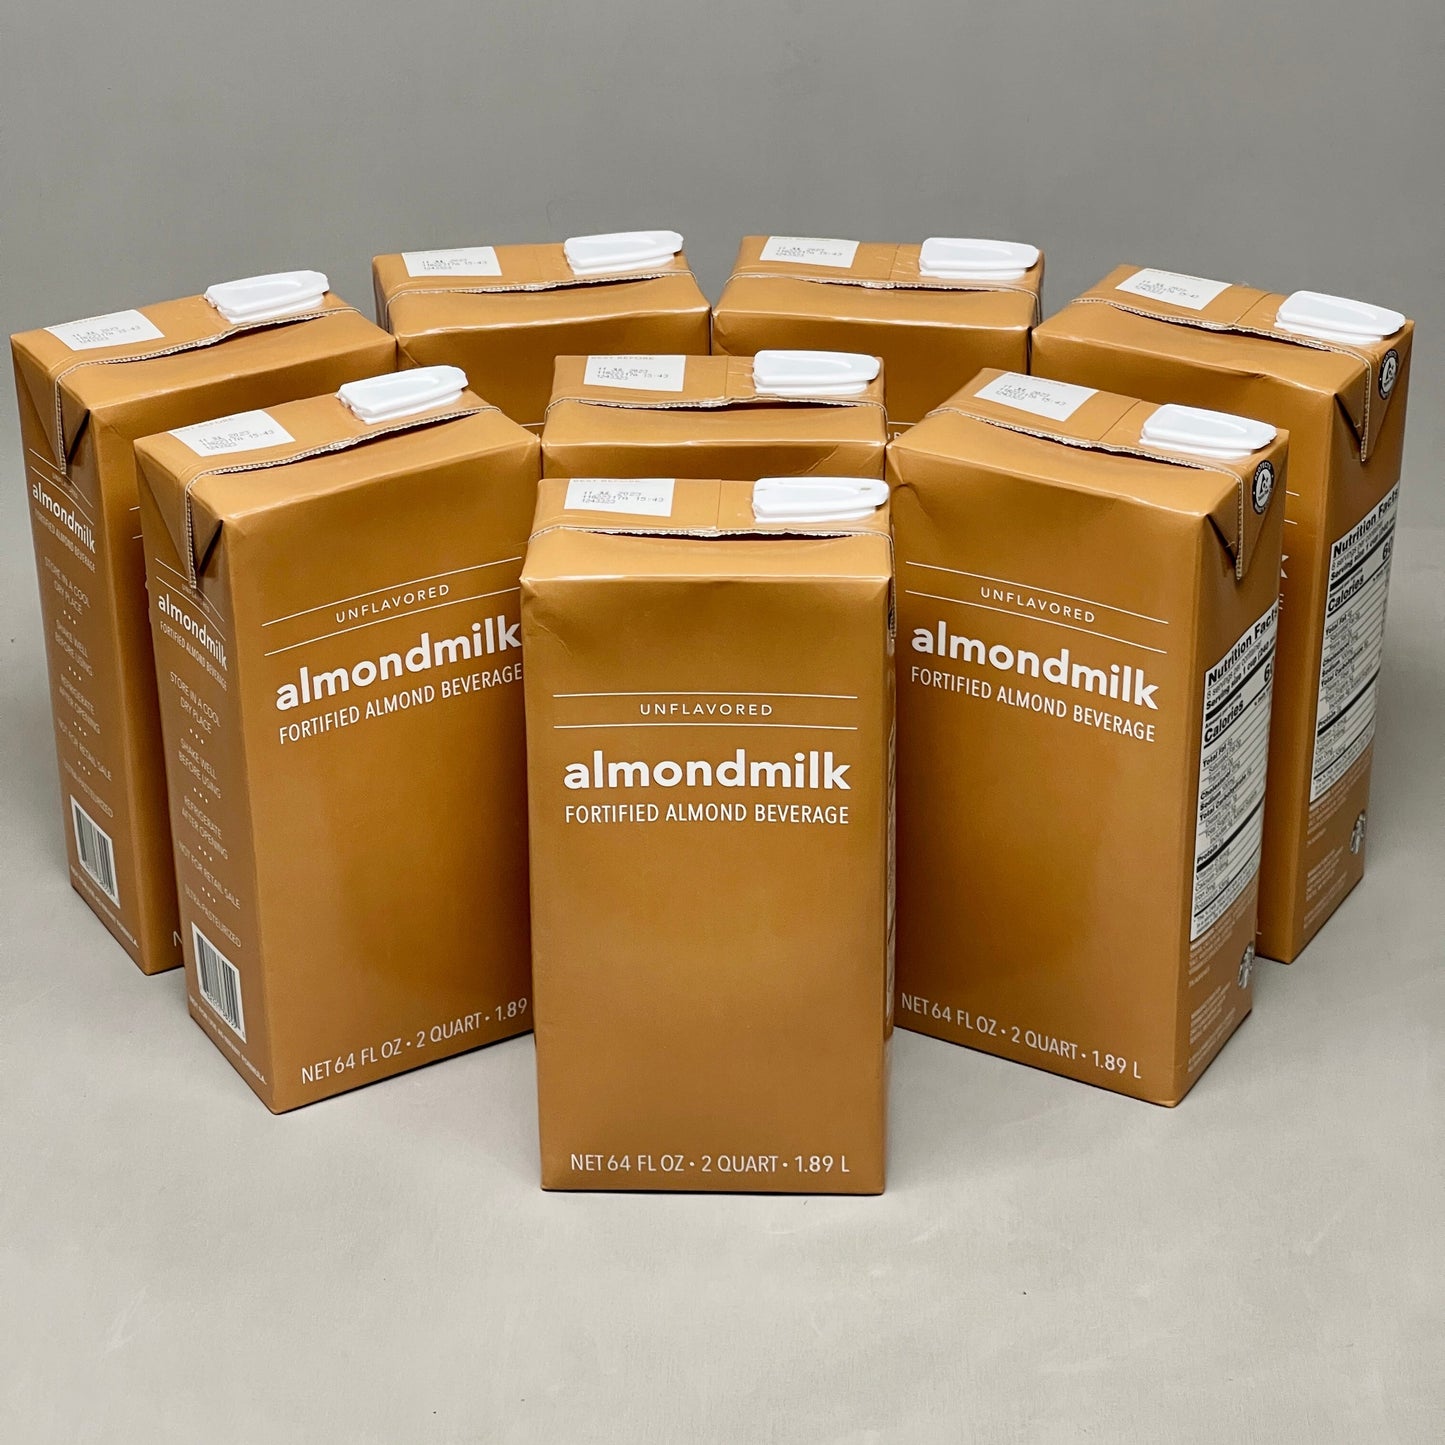 8-PK! STARBUCKS Unflavored Almond Milk Fortified Beverage 64 fl oz BB 09/23 (New, AS-IS)